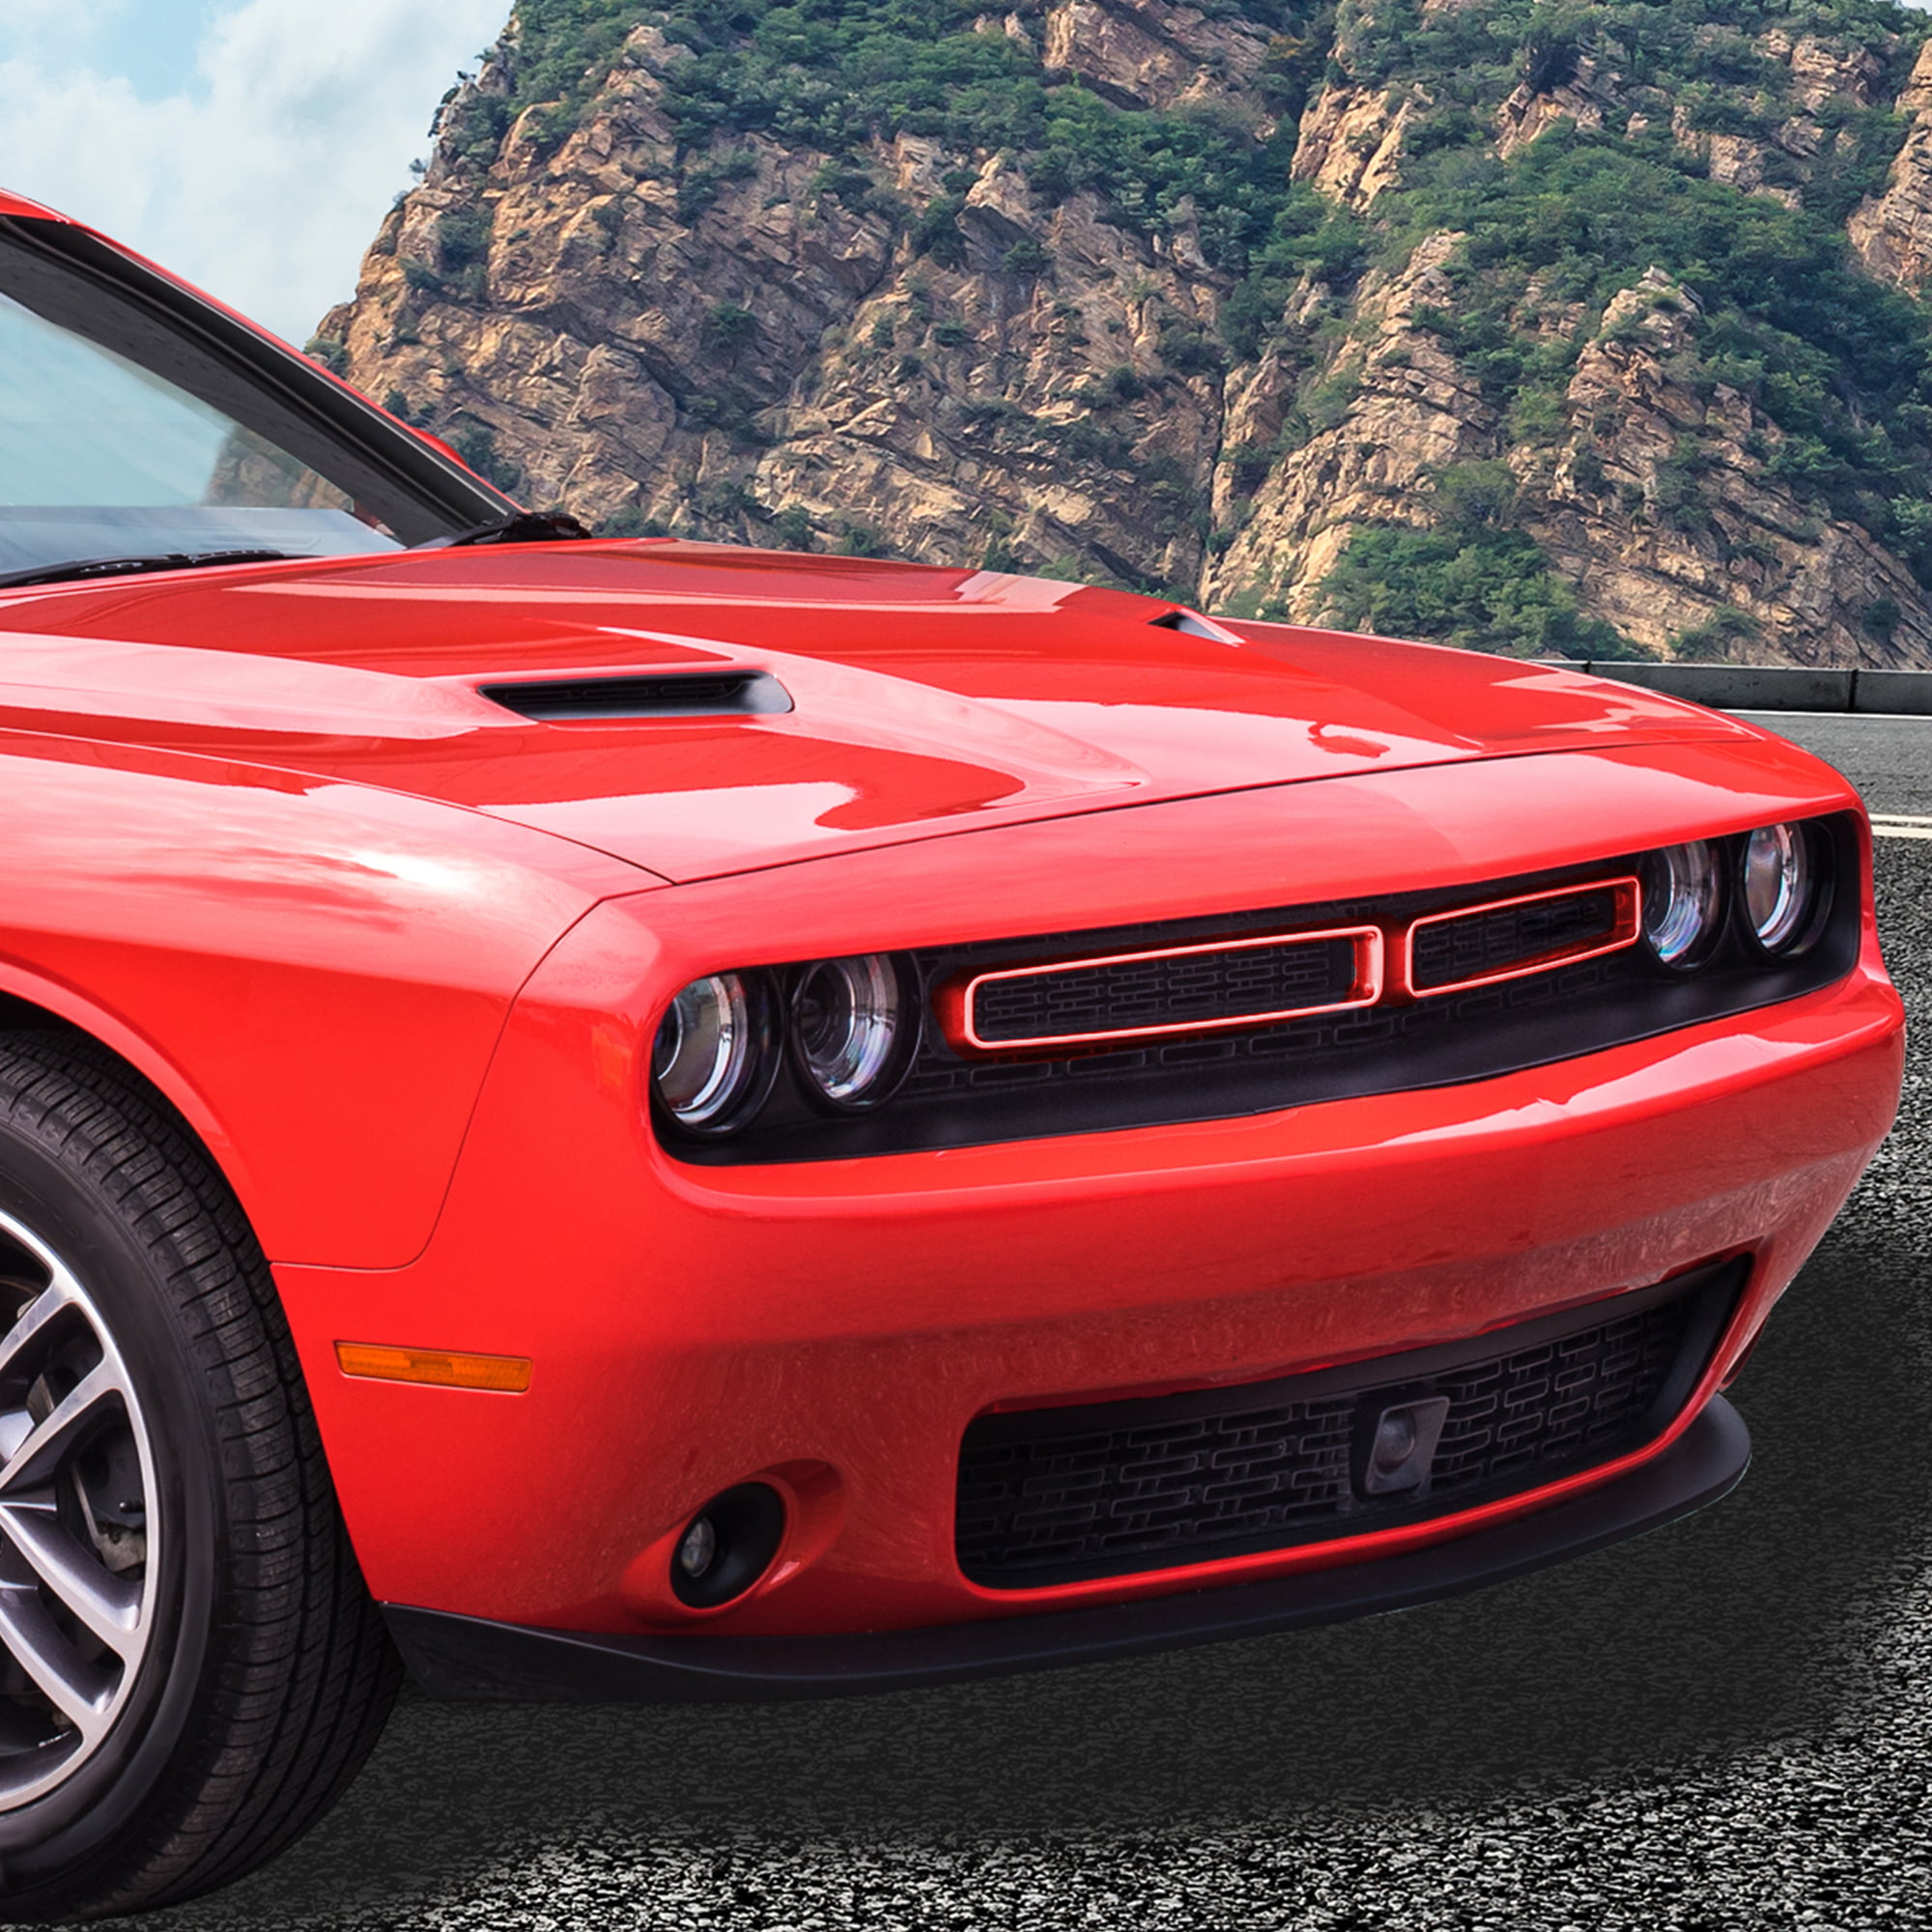 X AUTOHAUX 2pcs Front Grill Mesh Grille Inserts Guards ABS Cover Trim Replacement for Dodge Challenger 2015-2020 Red 